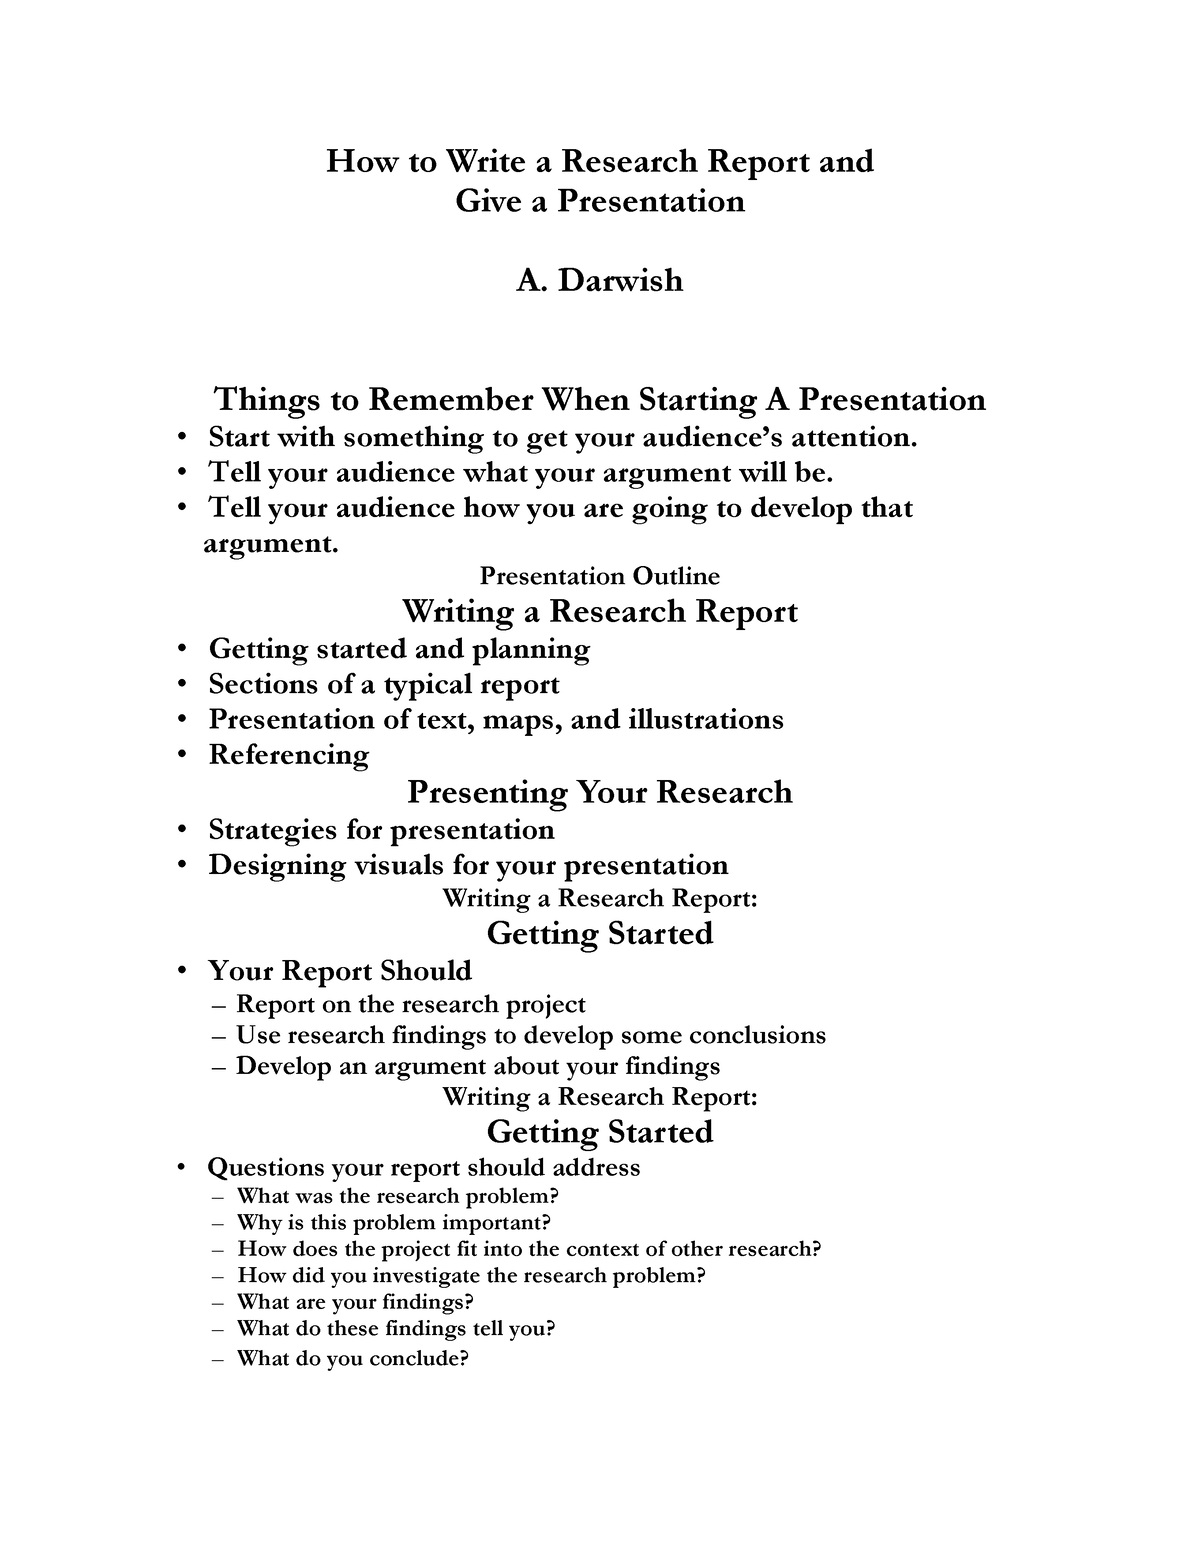 guideline to write a research report